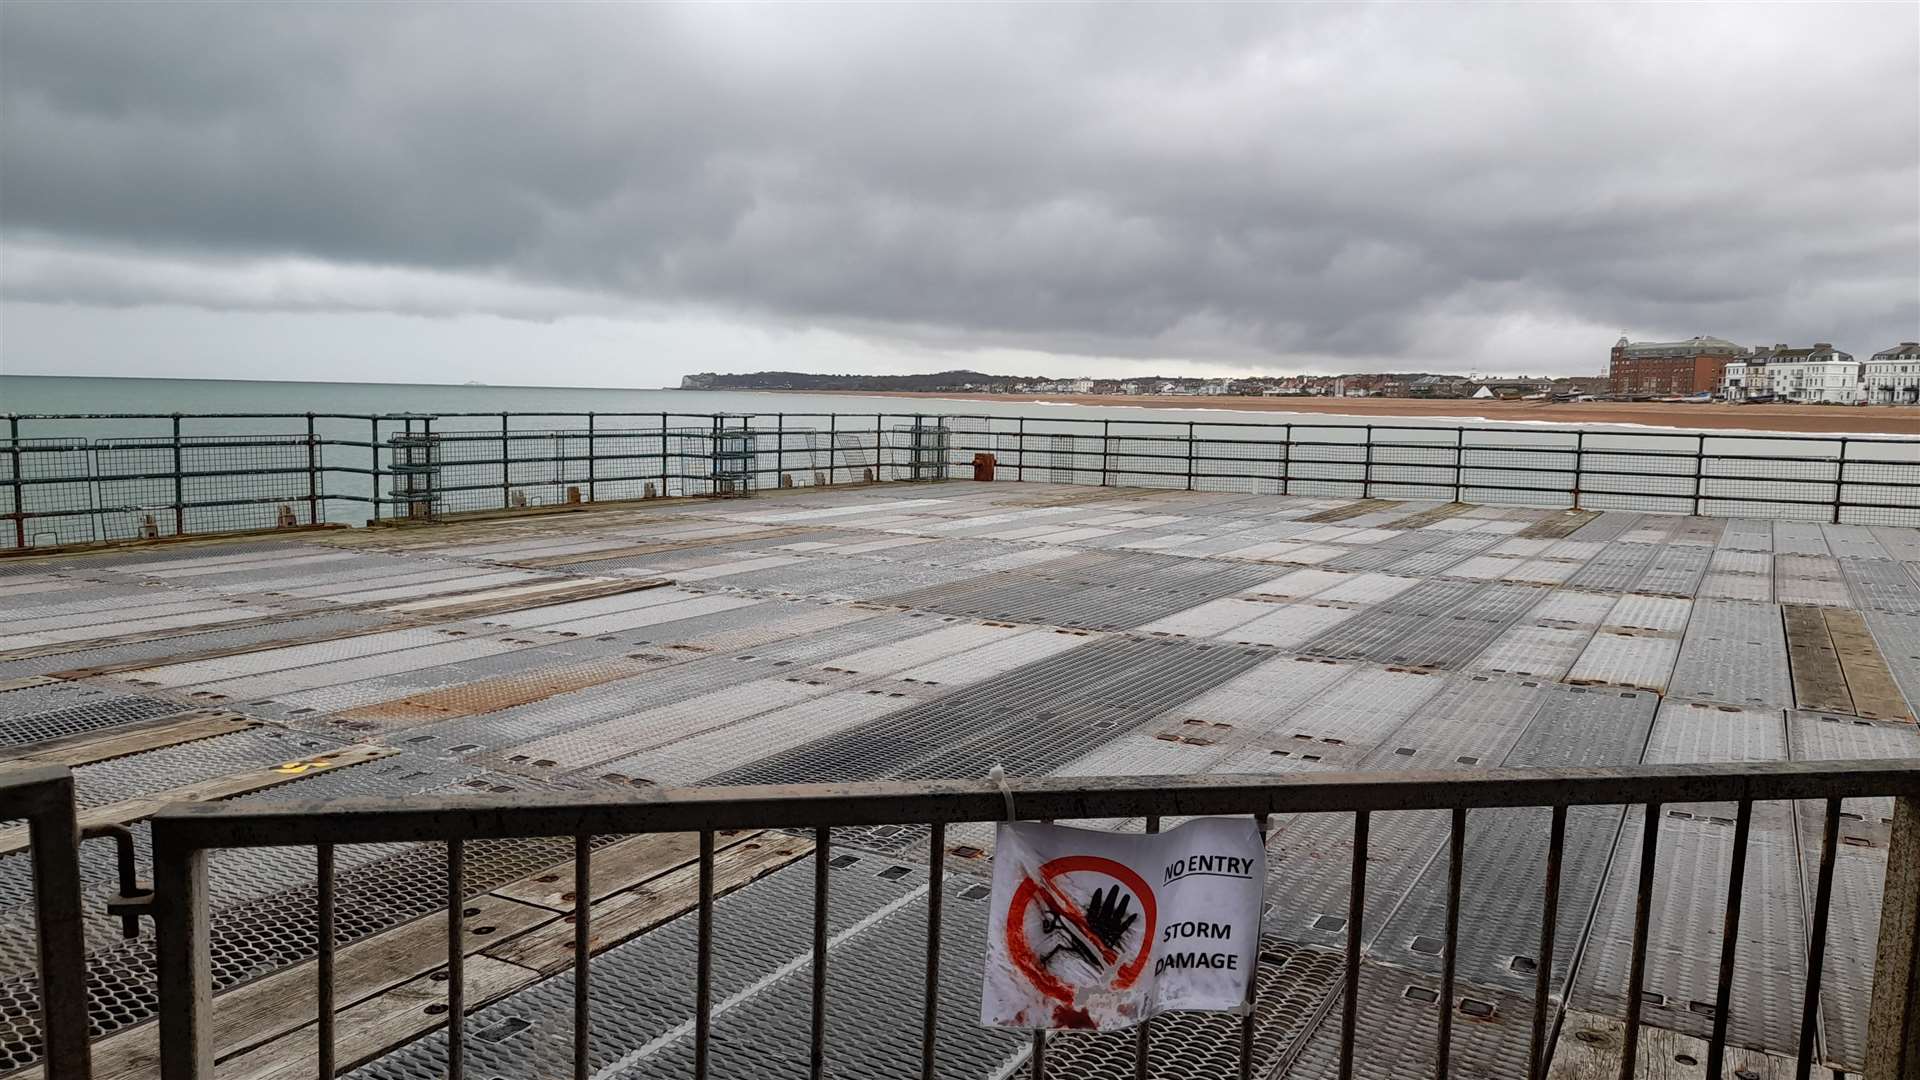 Part of the lower deck remains closed at Deal Pier